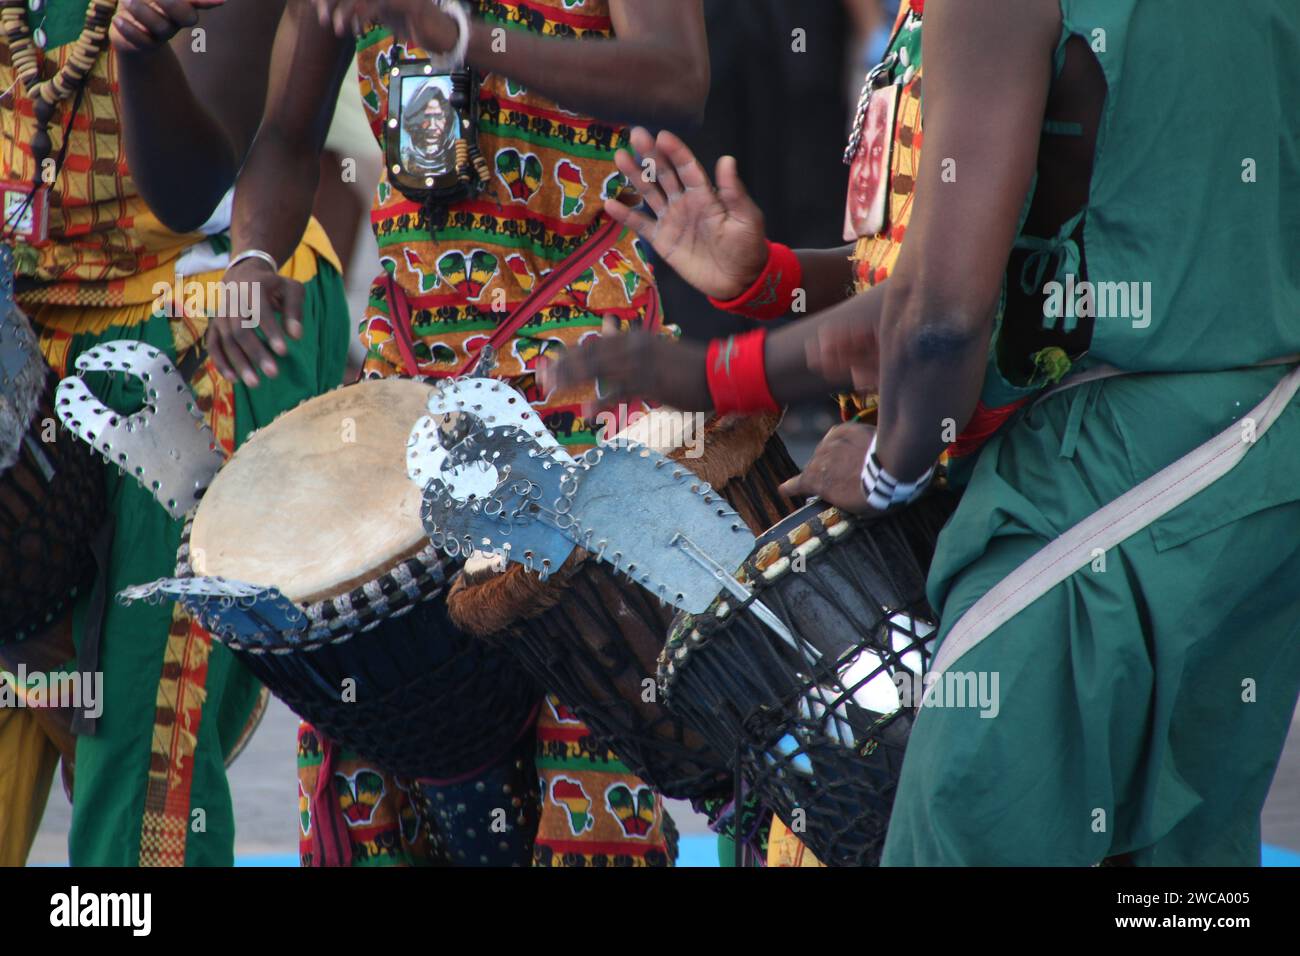 A group of folk drummers from Kenya perform in colorful attire in a spacious setting Stock Photo